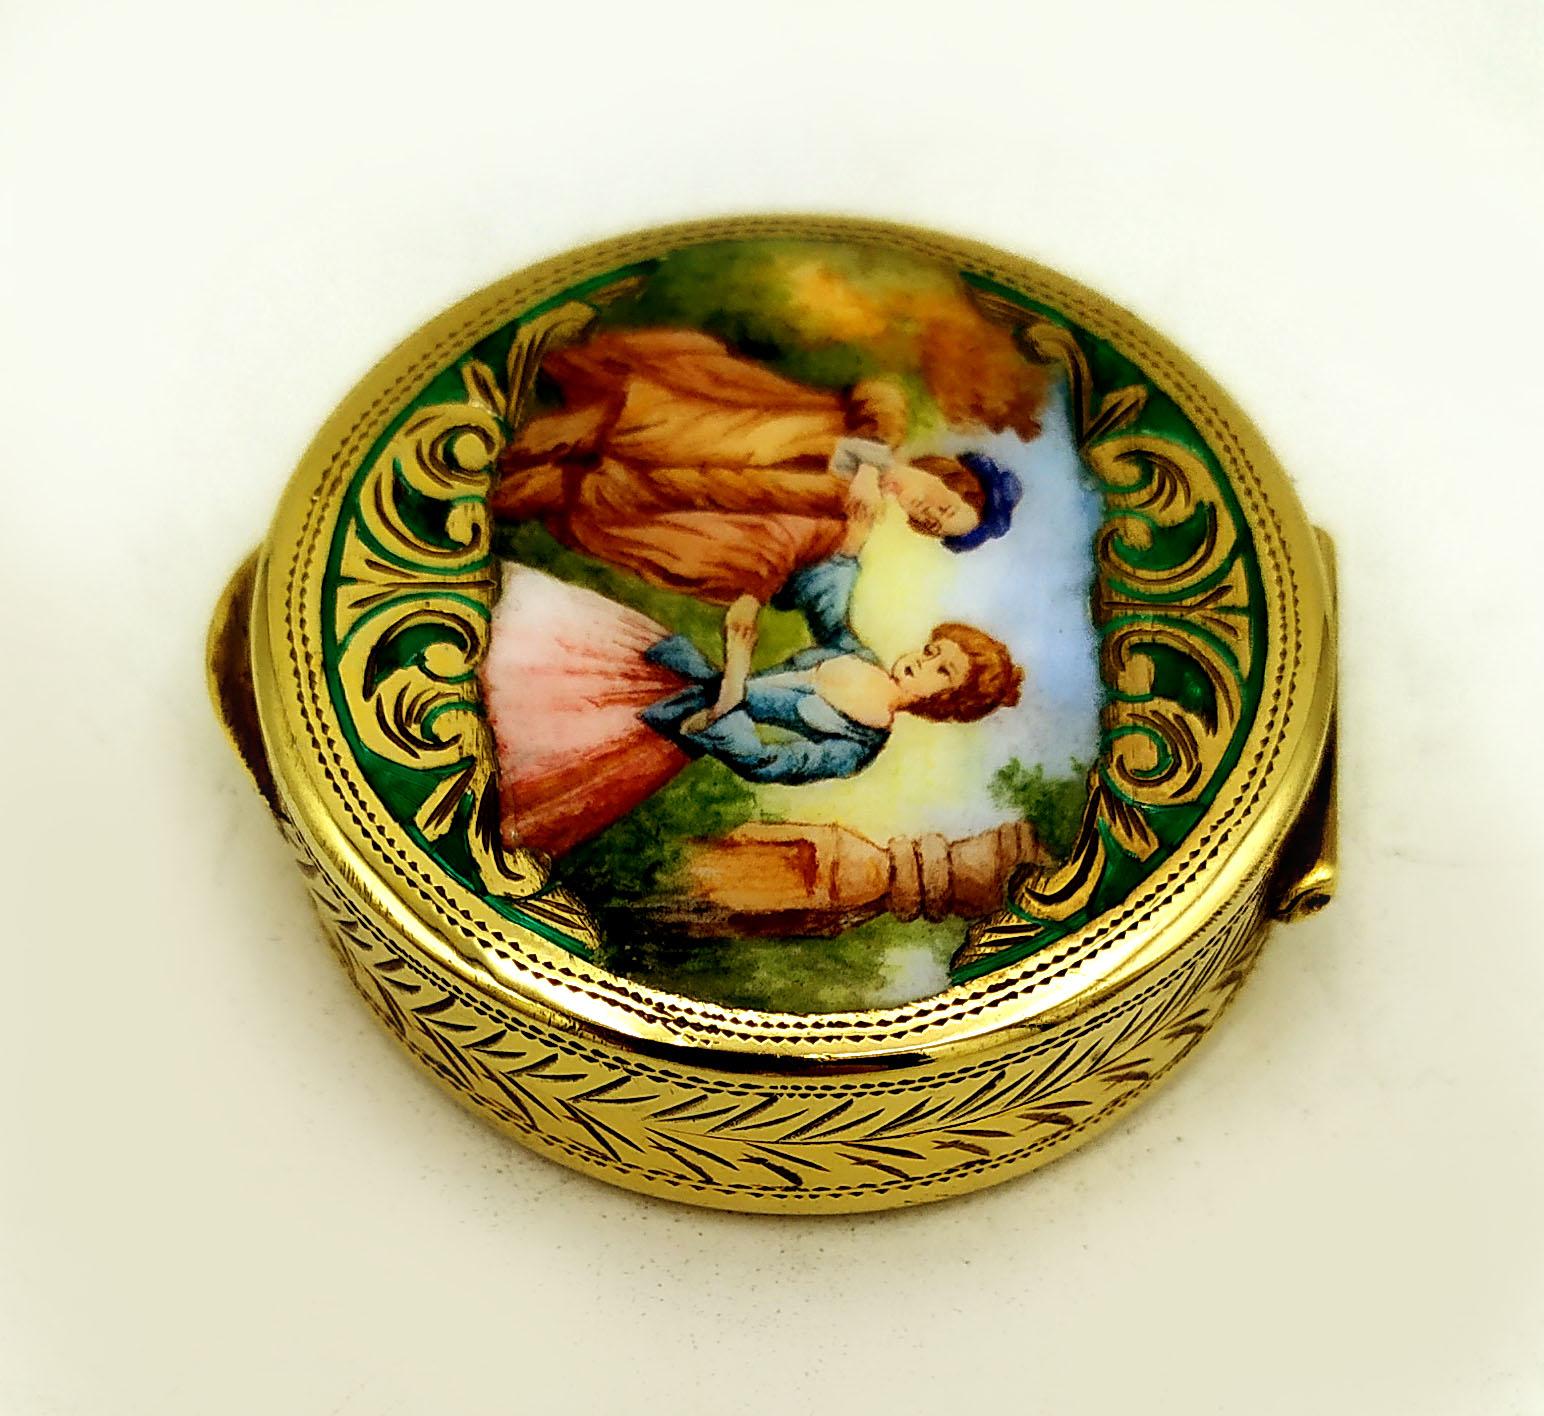 Pill Box Silver is in 925/1000 sterling silver gold plated 24carats.
Pill Box Silver is Round with translucent fired enamels on guilloché.
Pill Box Silver has a hand-painted miniature and fine hand engravings.
Pill Box Silver Sterling is in Louis